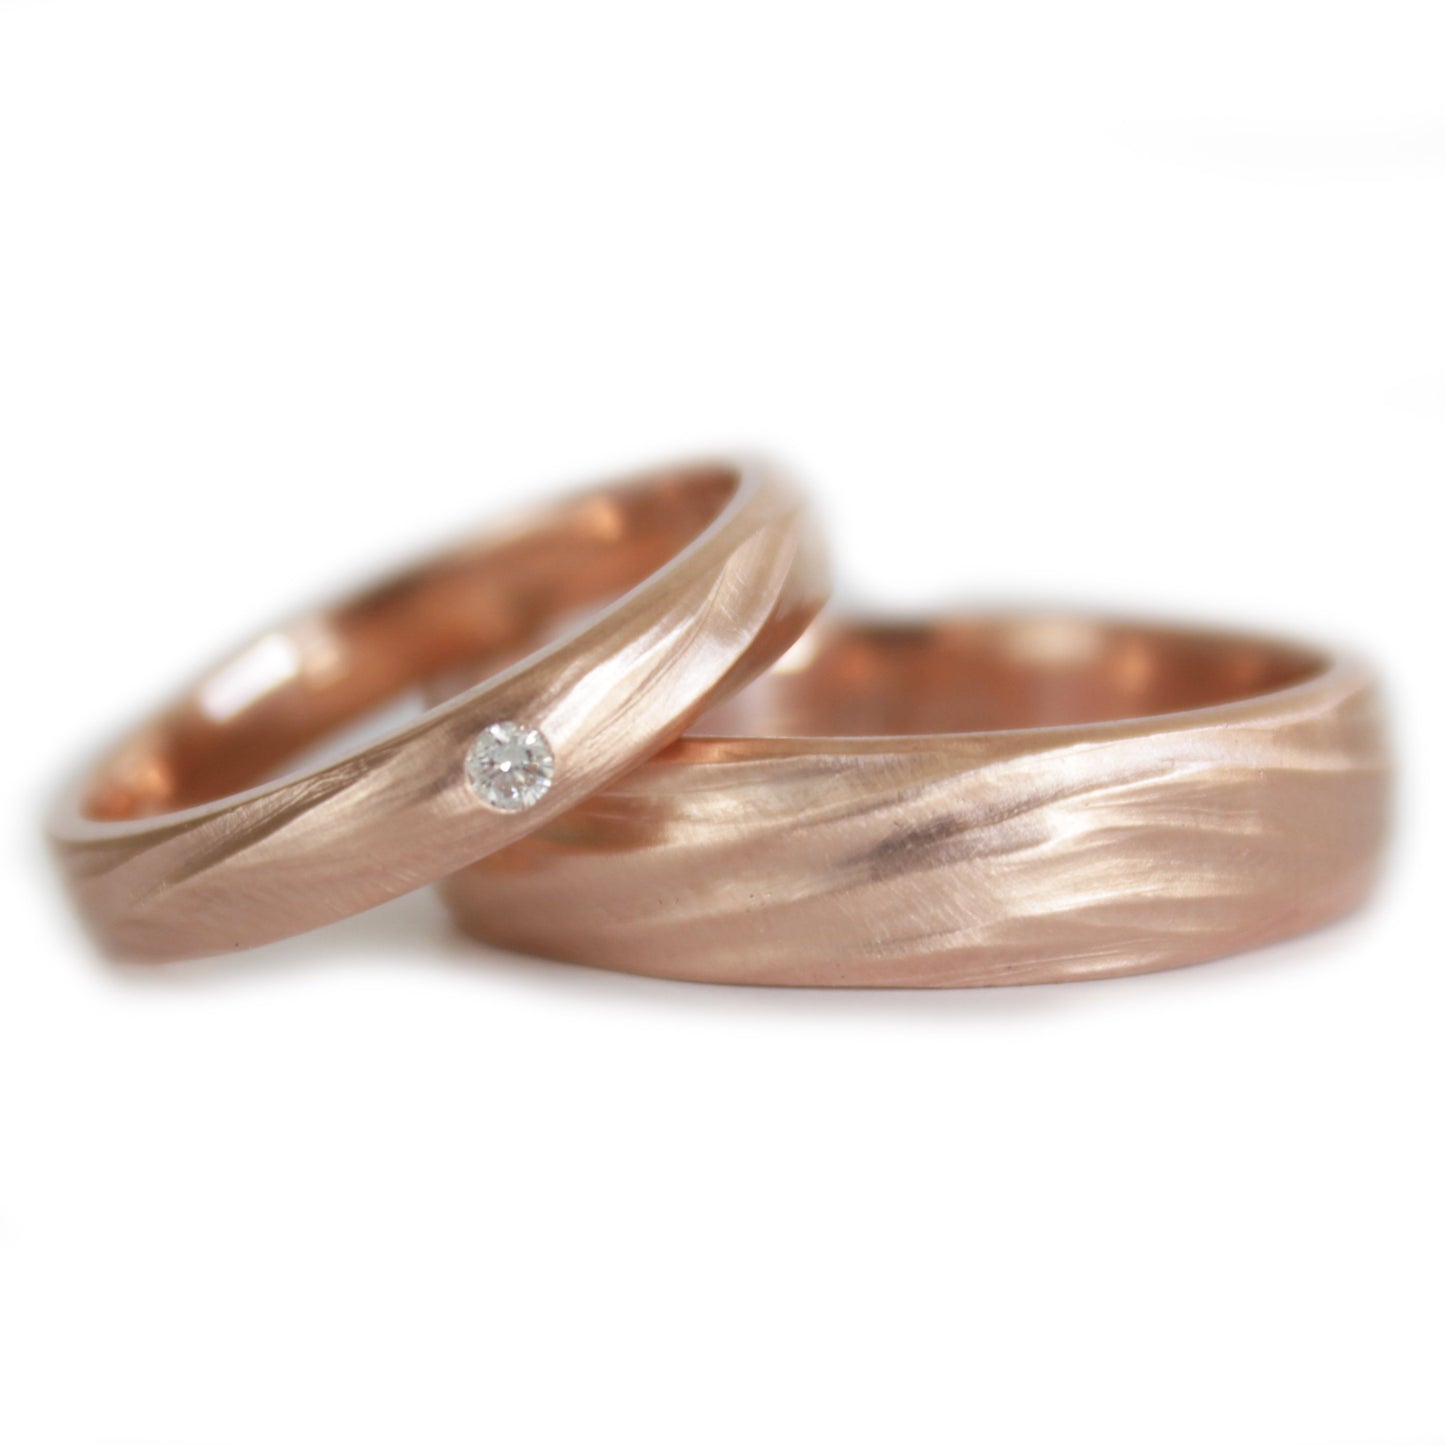 Rose Gold River Wedding rings set his and hers